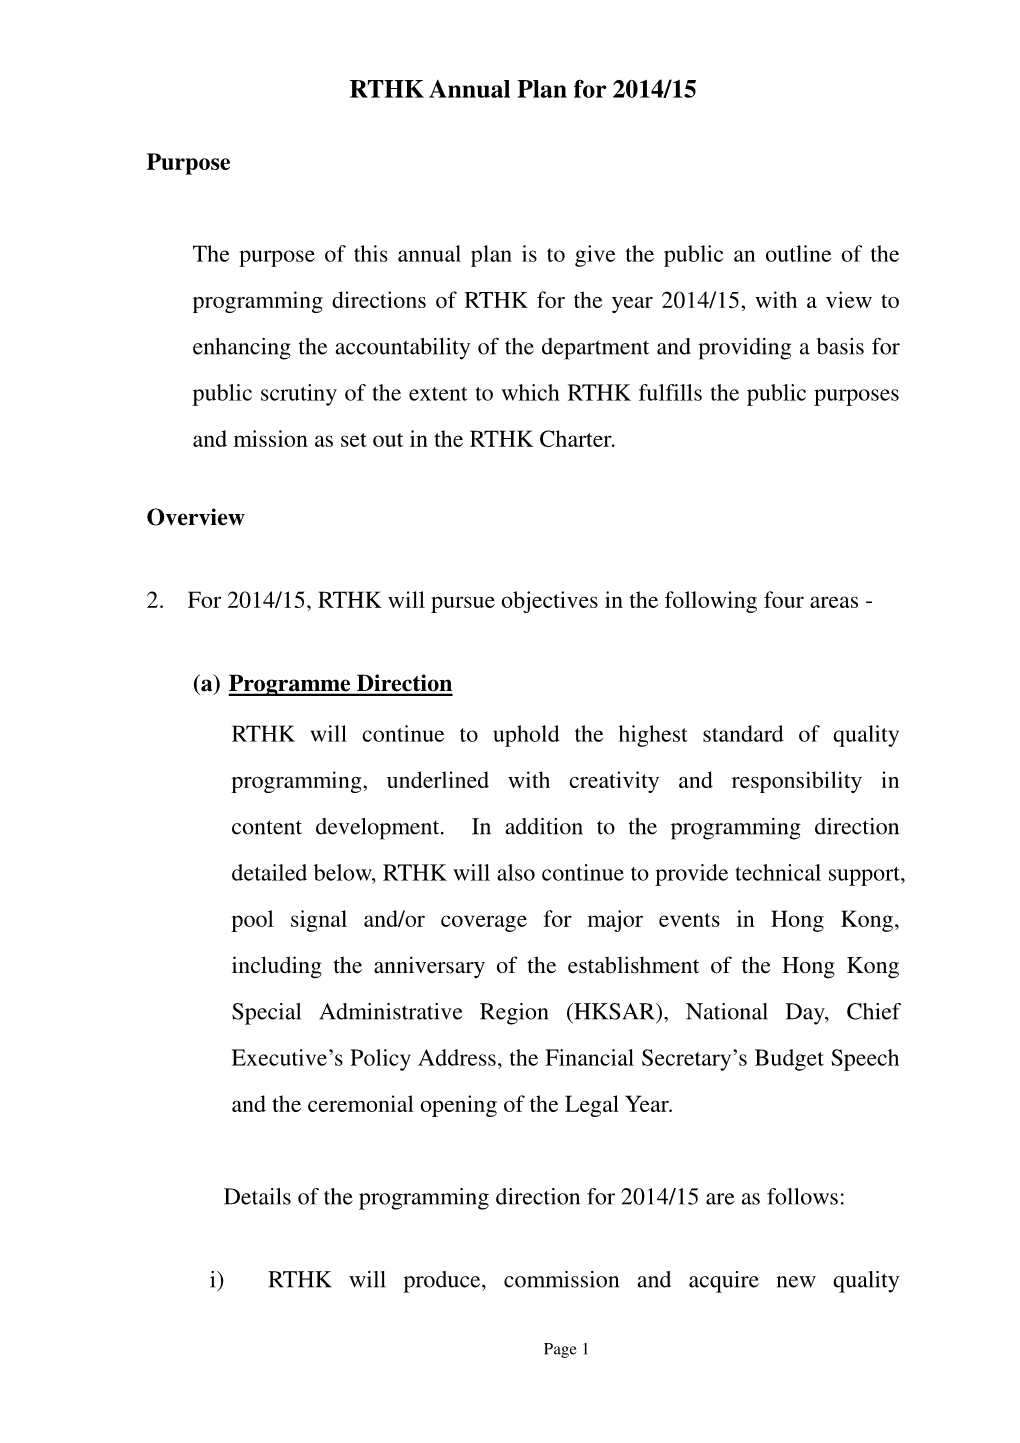 RTHK Annual Plan for 2014/15